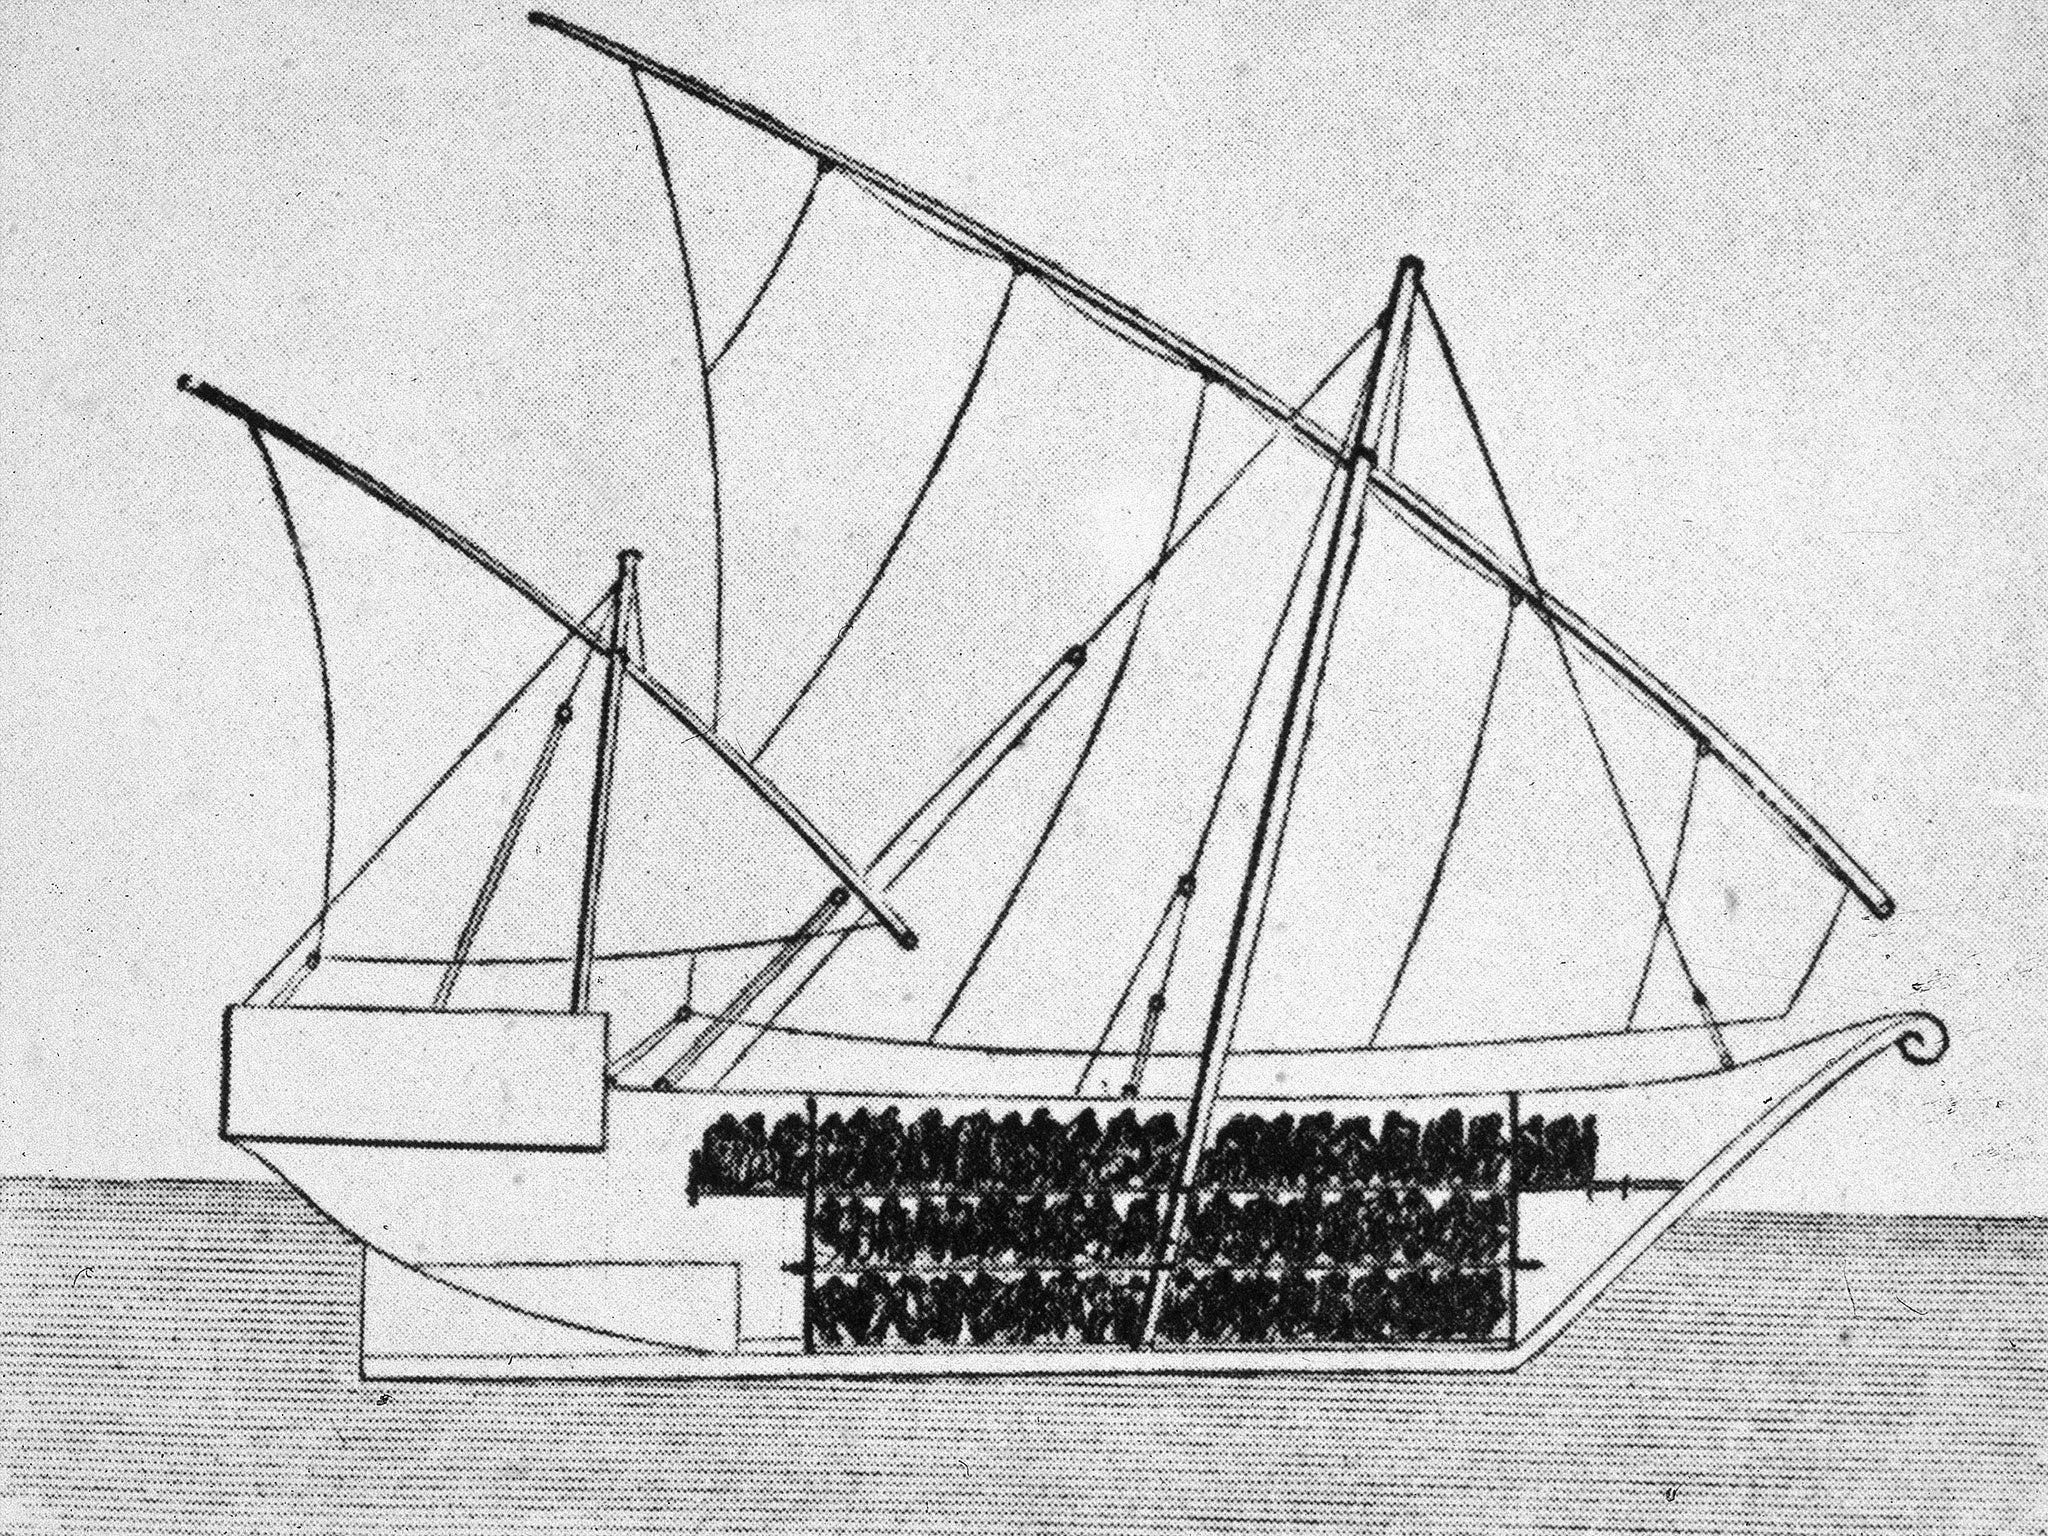 Sketch of a ship used to transport slaves in the 1750s